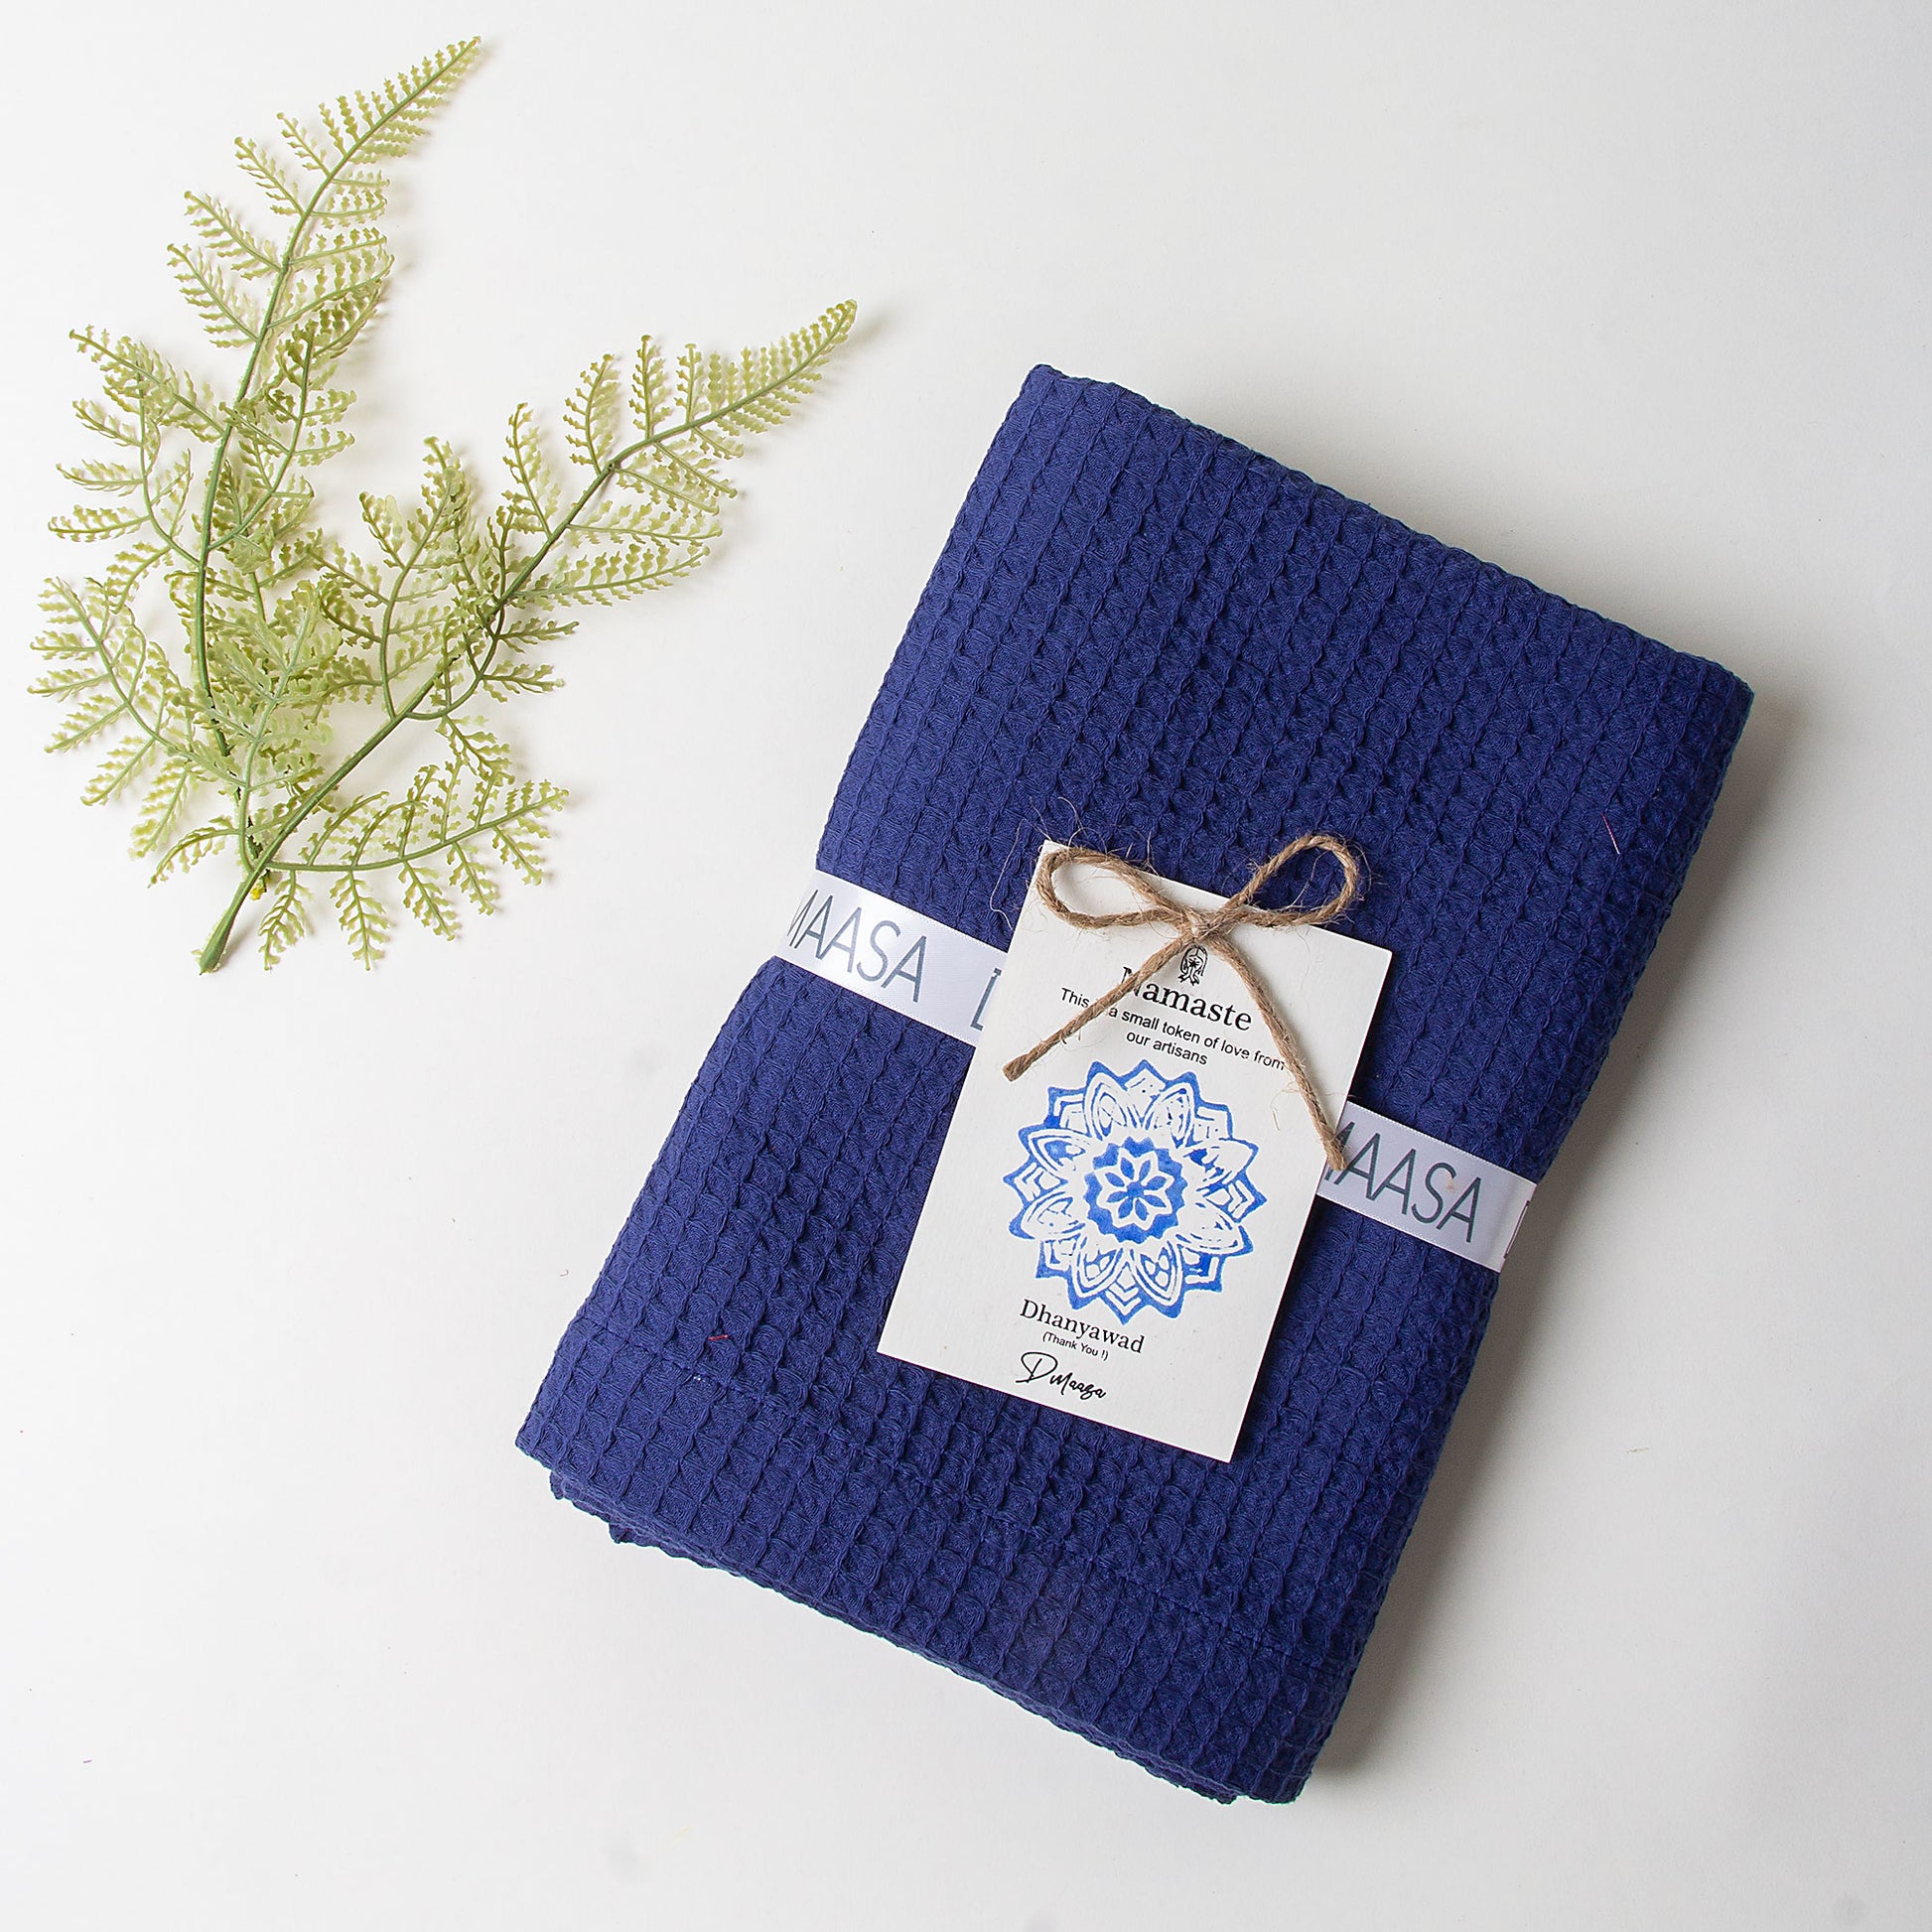 Blue Pure Cotton Soft Warm Muslin Baby Swaddle For Newborn Baby Online